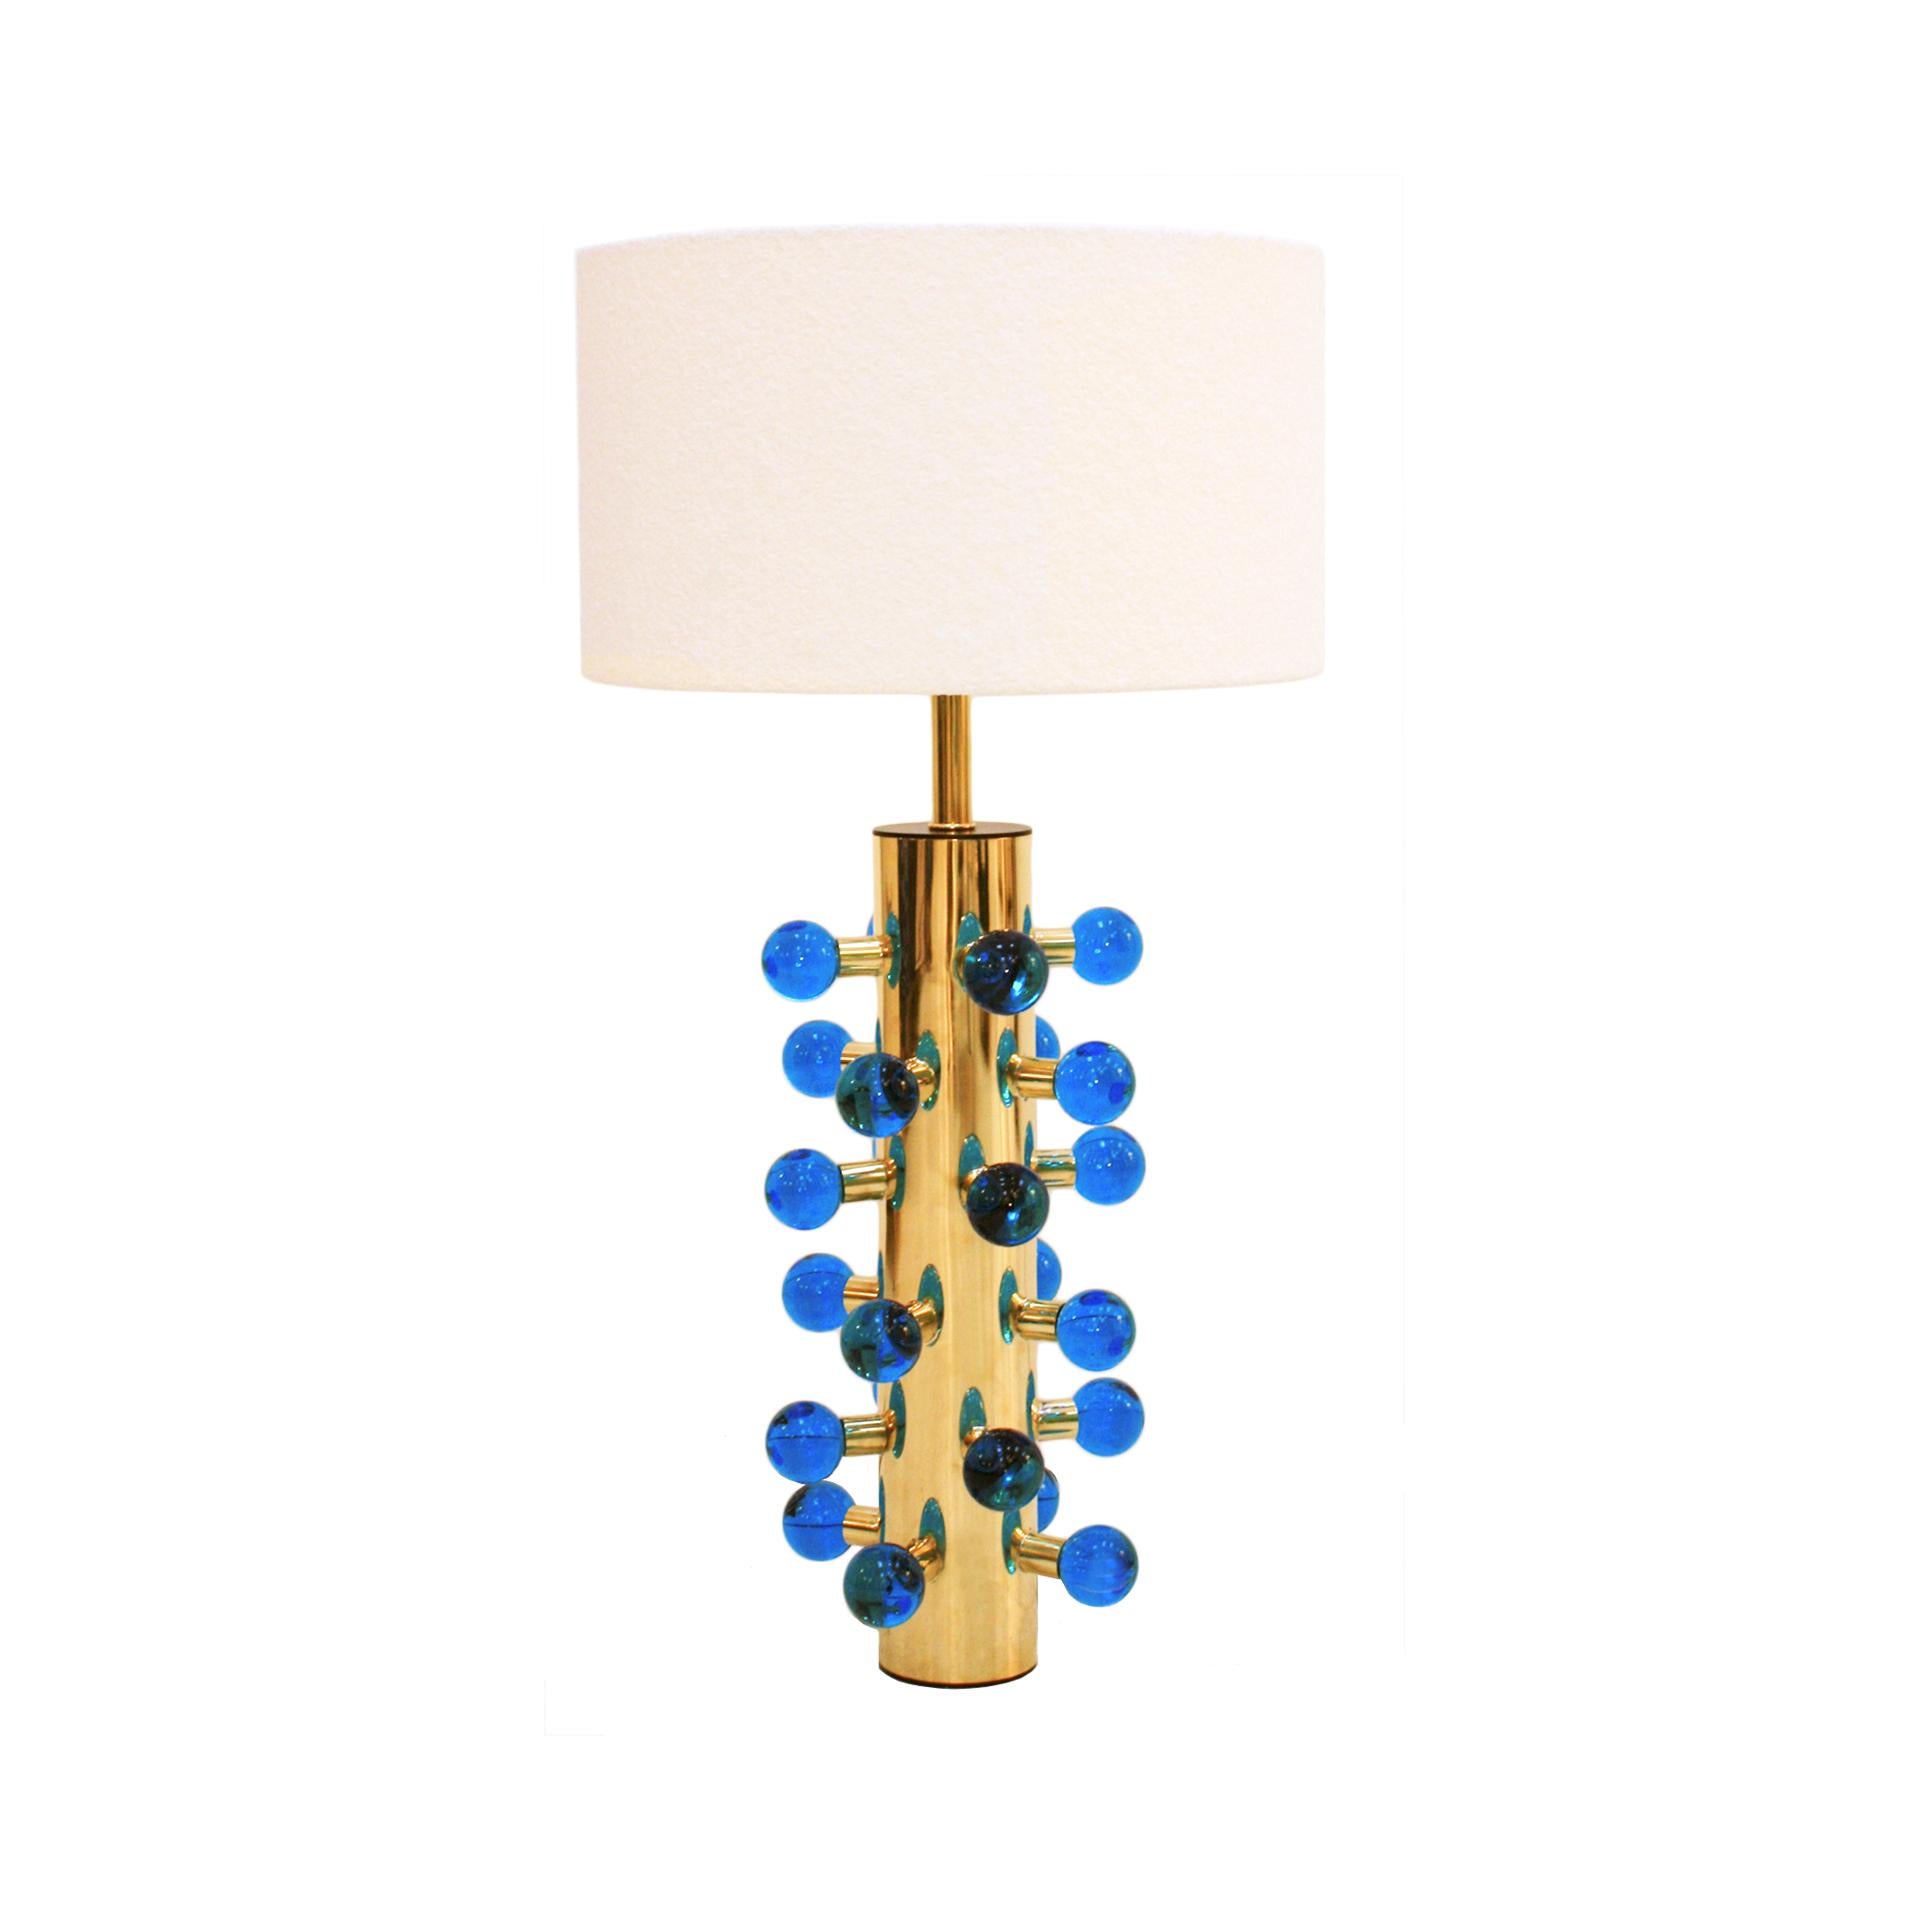 Contemporary maximalist pair of brass table lamps, a stunning blend of modern design and opulence. This exquisite lamp features a cylindrical Polished brass structure adorned with spherical Murano colored in blue glass pieces, adding a touch of